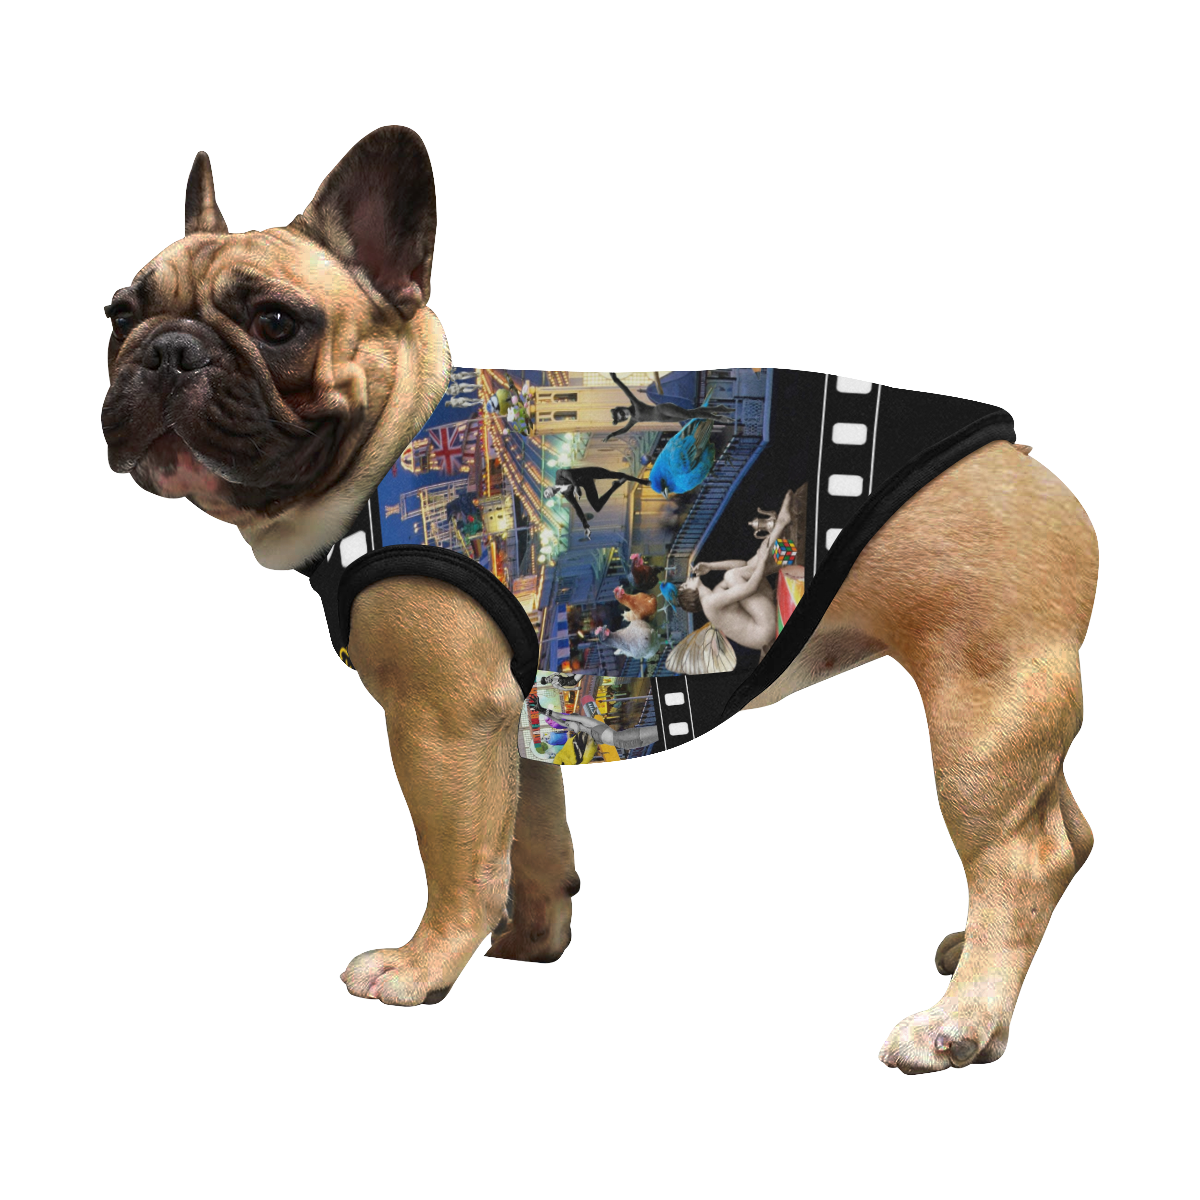 Welcome to Brighton All Over Print Pet Tank Top